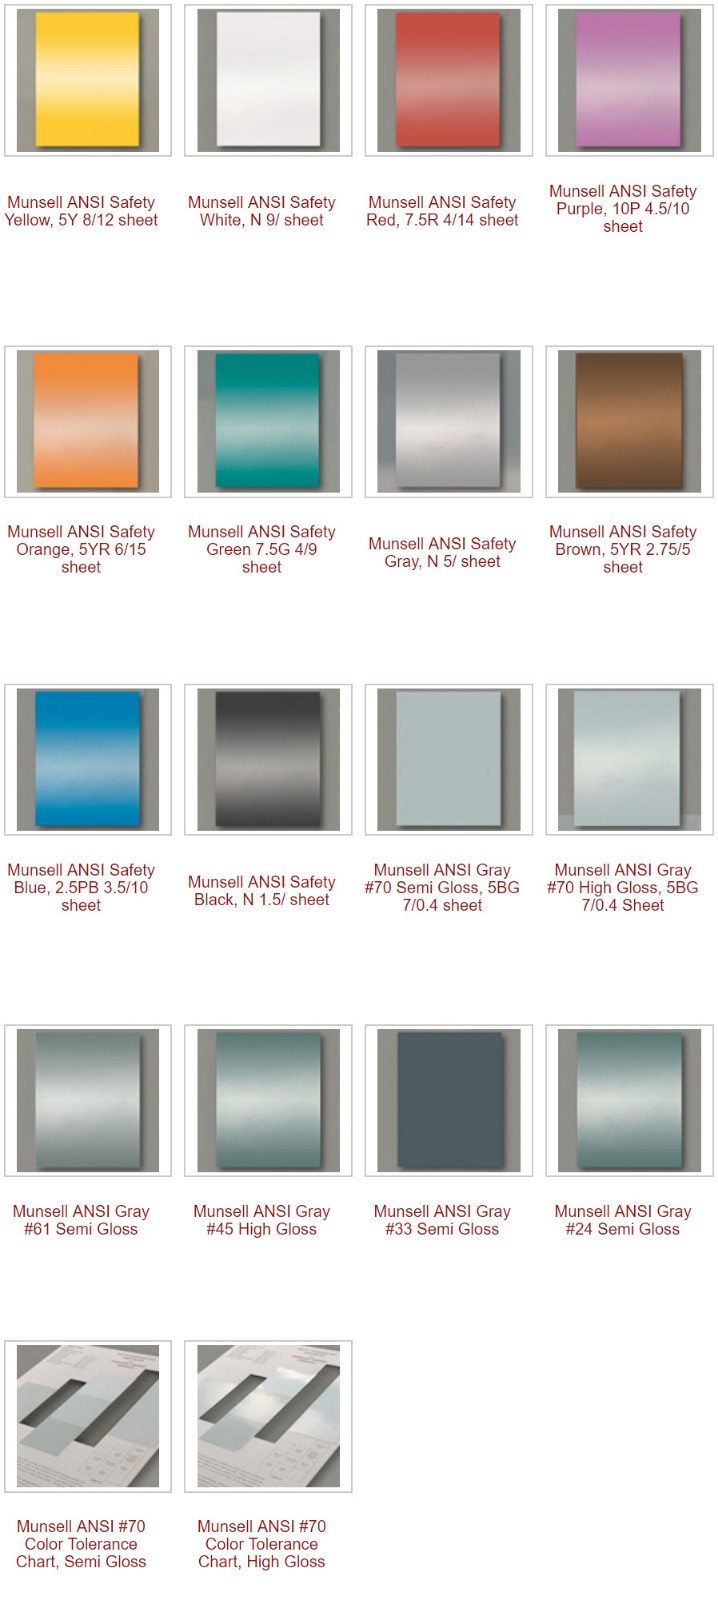 Munsell ANSI color Standards